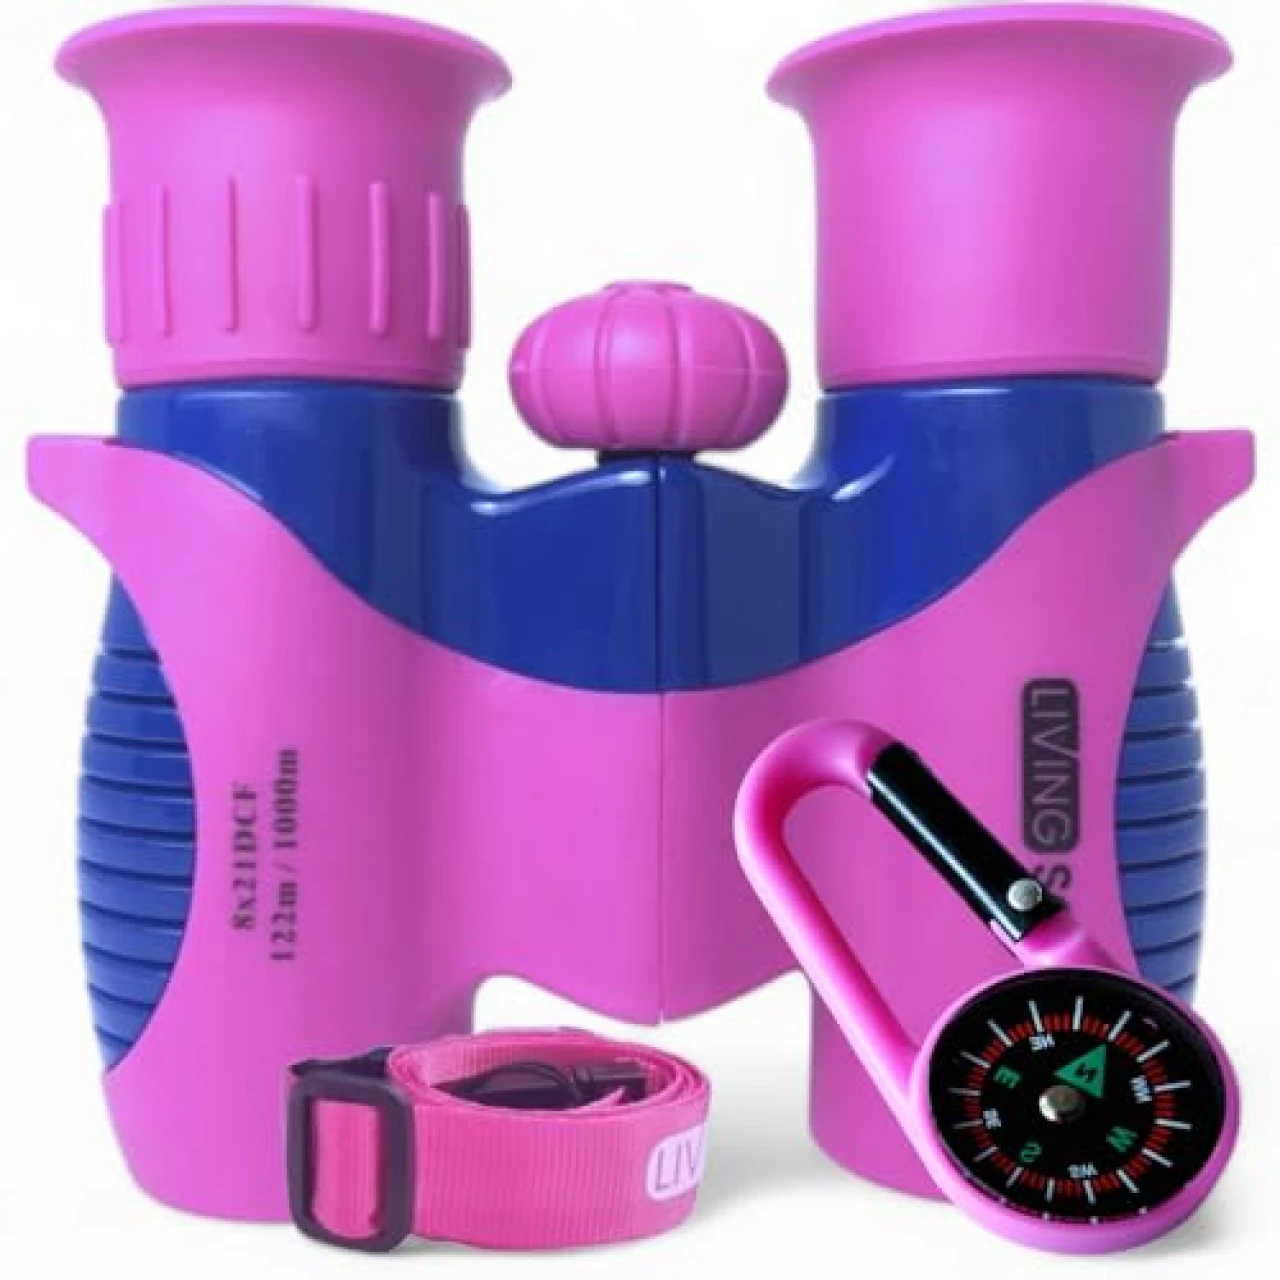 Kids Binoculars Pink 8x21 - Girls Gift Age 3-12, Shockproof Compact Binoculars for Kids with High Resolution Optics for Bird Watching, Stargazing, Hunting, Hiking, with Case, Neck Strap